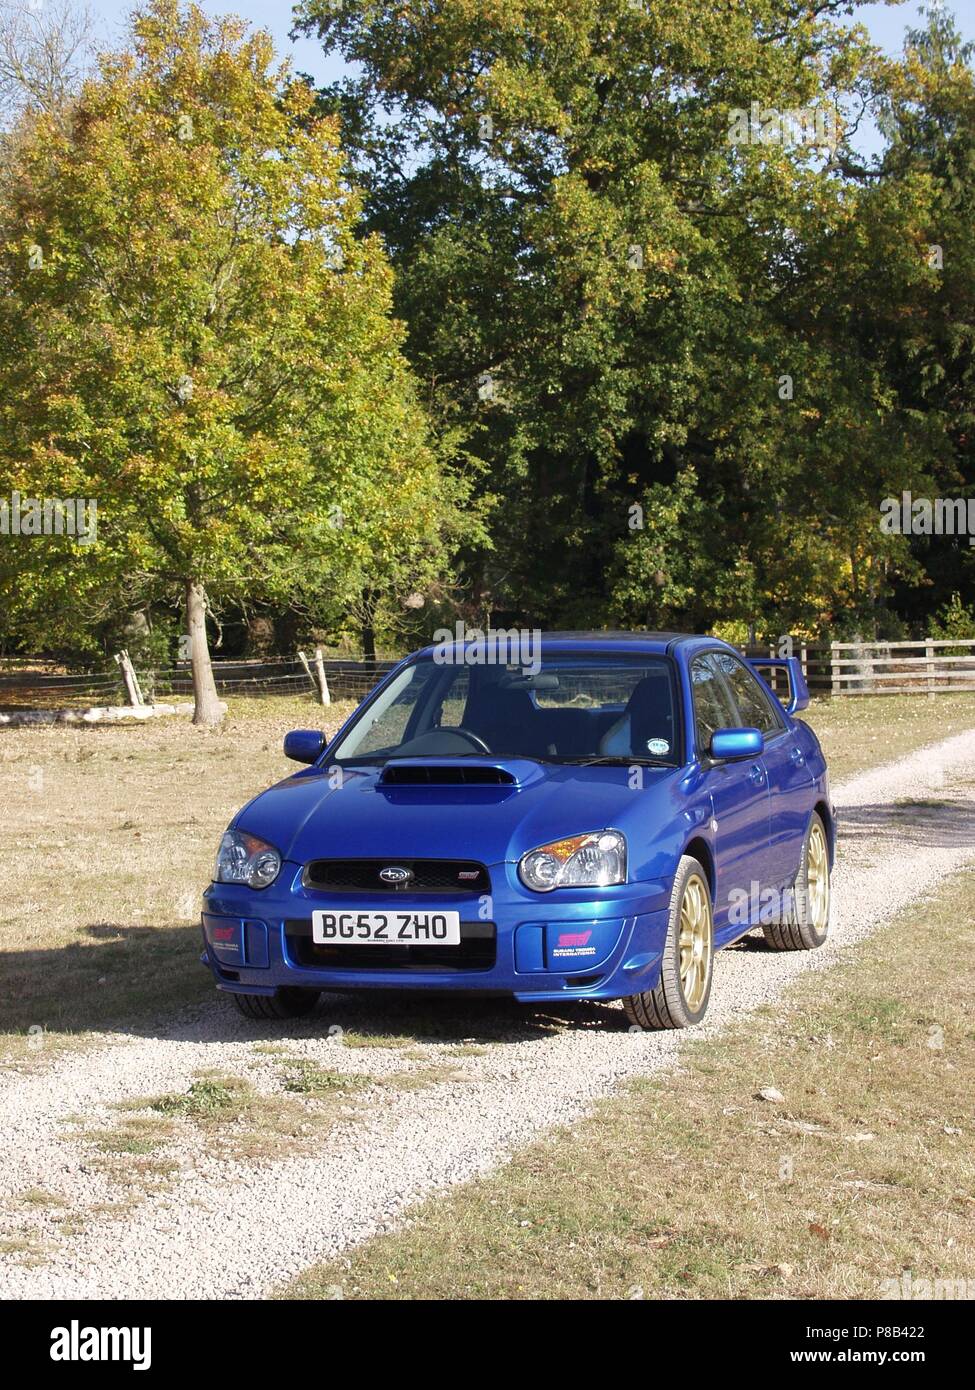 Subaru Impreza WRX STI in WR blue pearl colour with alloy wheels - showing front and side view in countryside Stock Photo